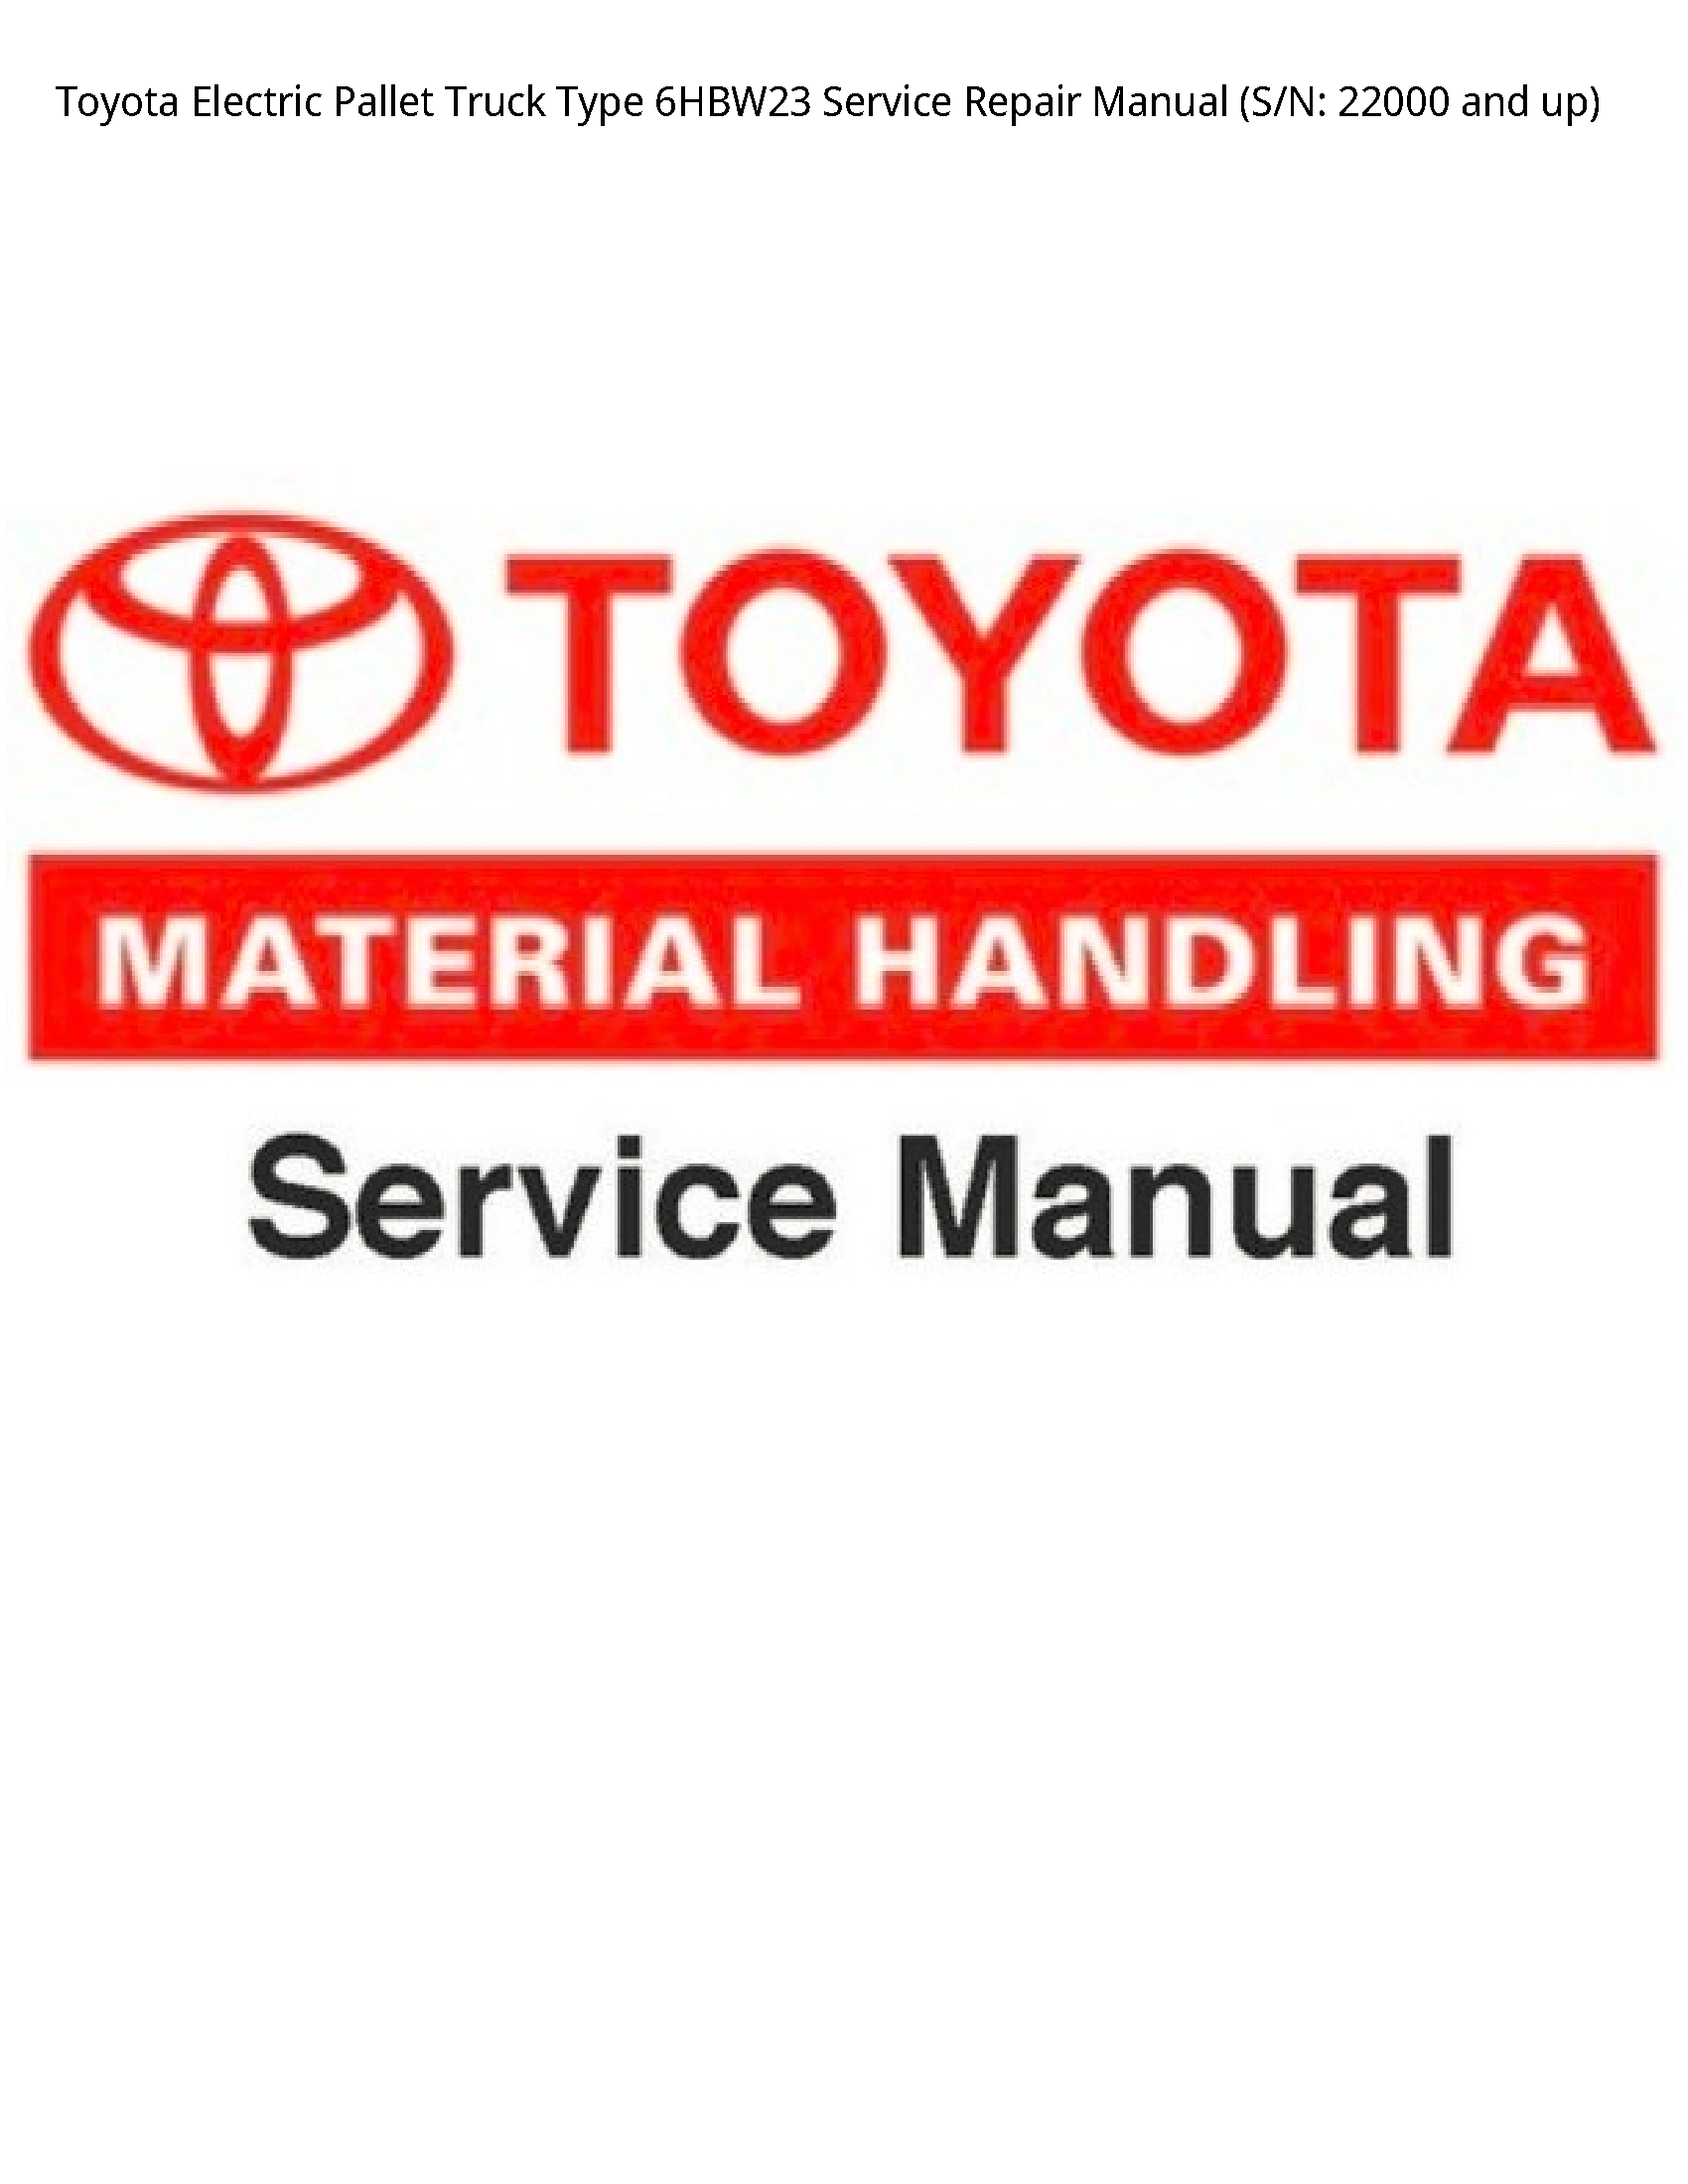 Toyota 6HBW23 Electric Pallet Truck Type manual